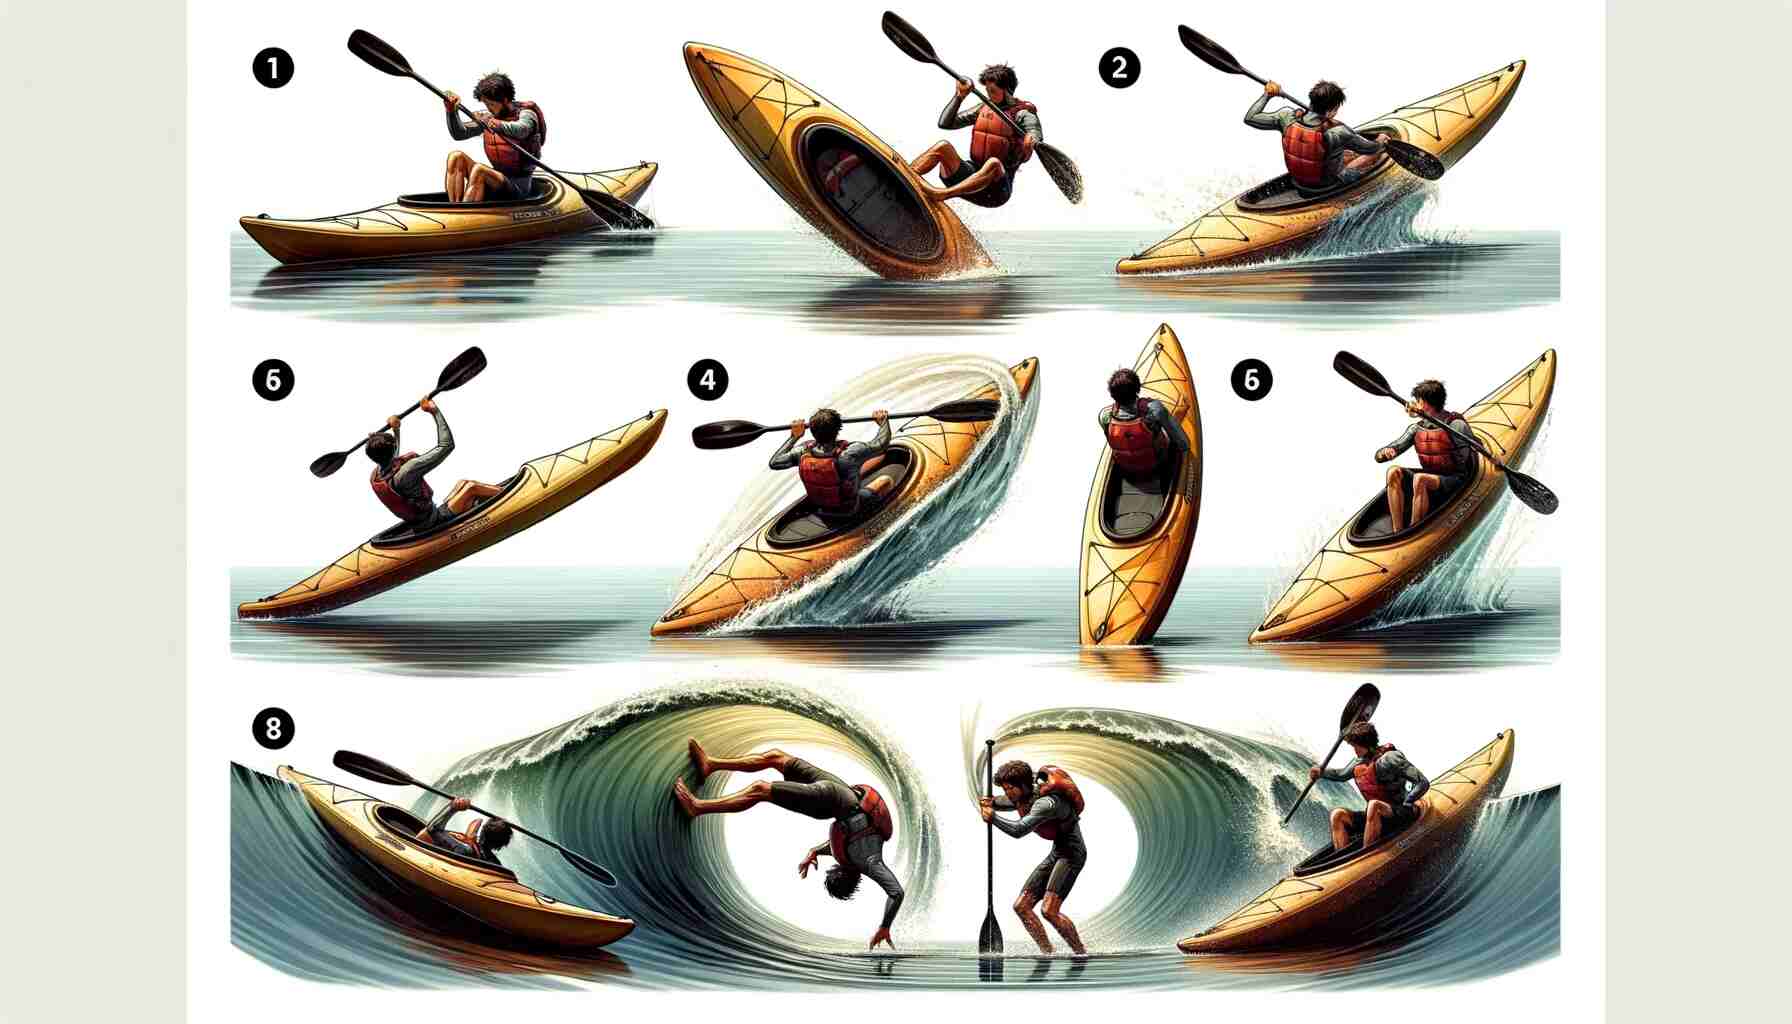 Sequential illustration of the five steps in Kayak Rolling 101. 1) Set Up: A kayaker in a blue kayak, positioned correctly with the paddle held horizontally. 2) Capsize: The same kayaker intentionally tipping the kayak sideways, beginning to submerge. 3) Sweep: The kayaker uses a sweeping motion with the paddle in the water. 4) Hip Snap: Mid-roll, focusing on the kayaker's hips and lower body as the kayak flips upright. 5) Recovery: The kayaker returns to a stable, upright position, adjusting posture and paddle.